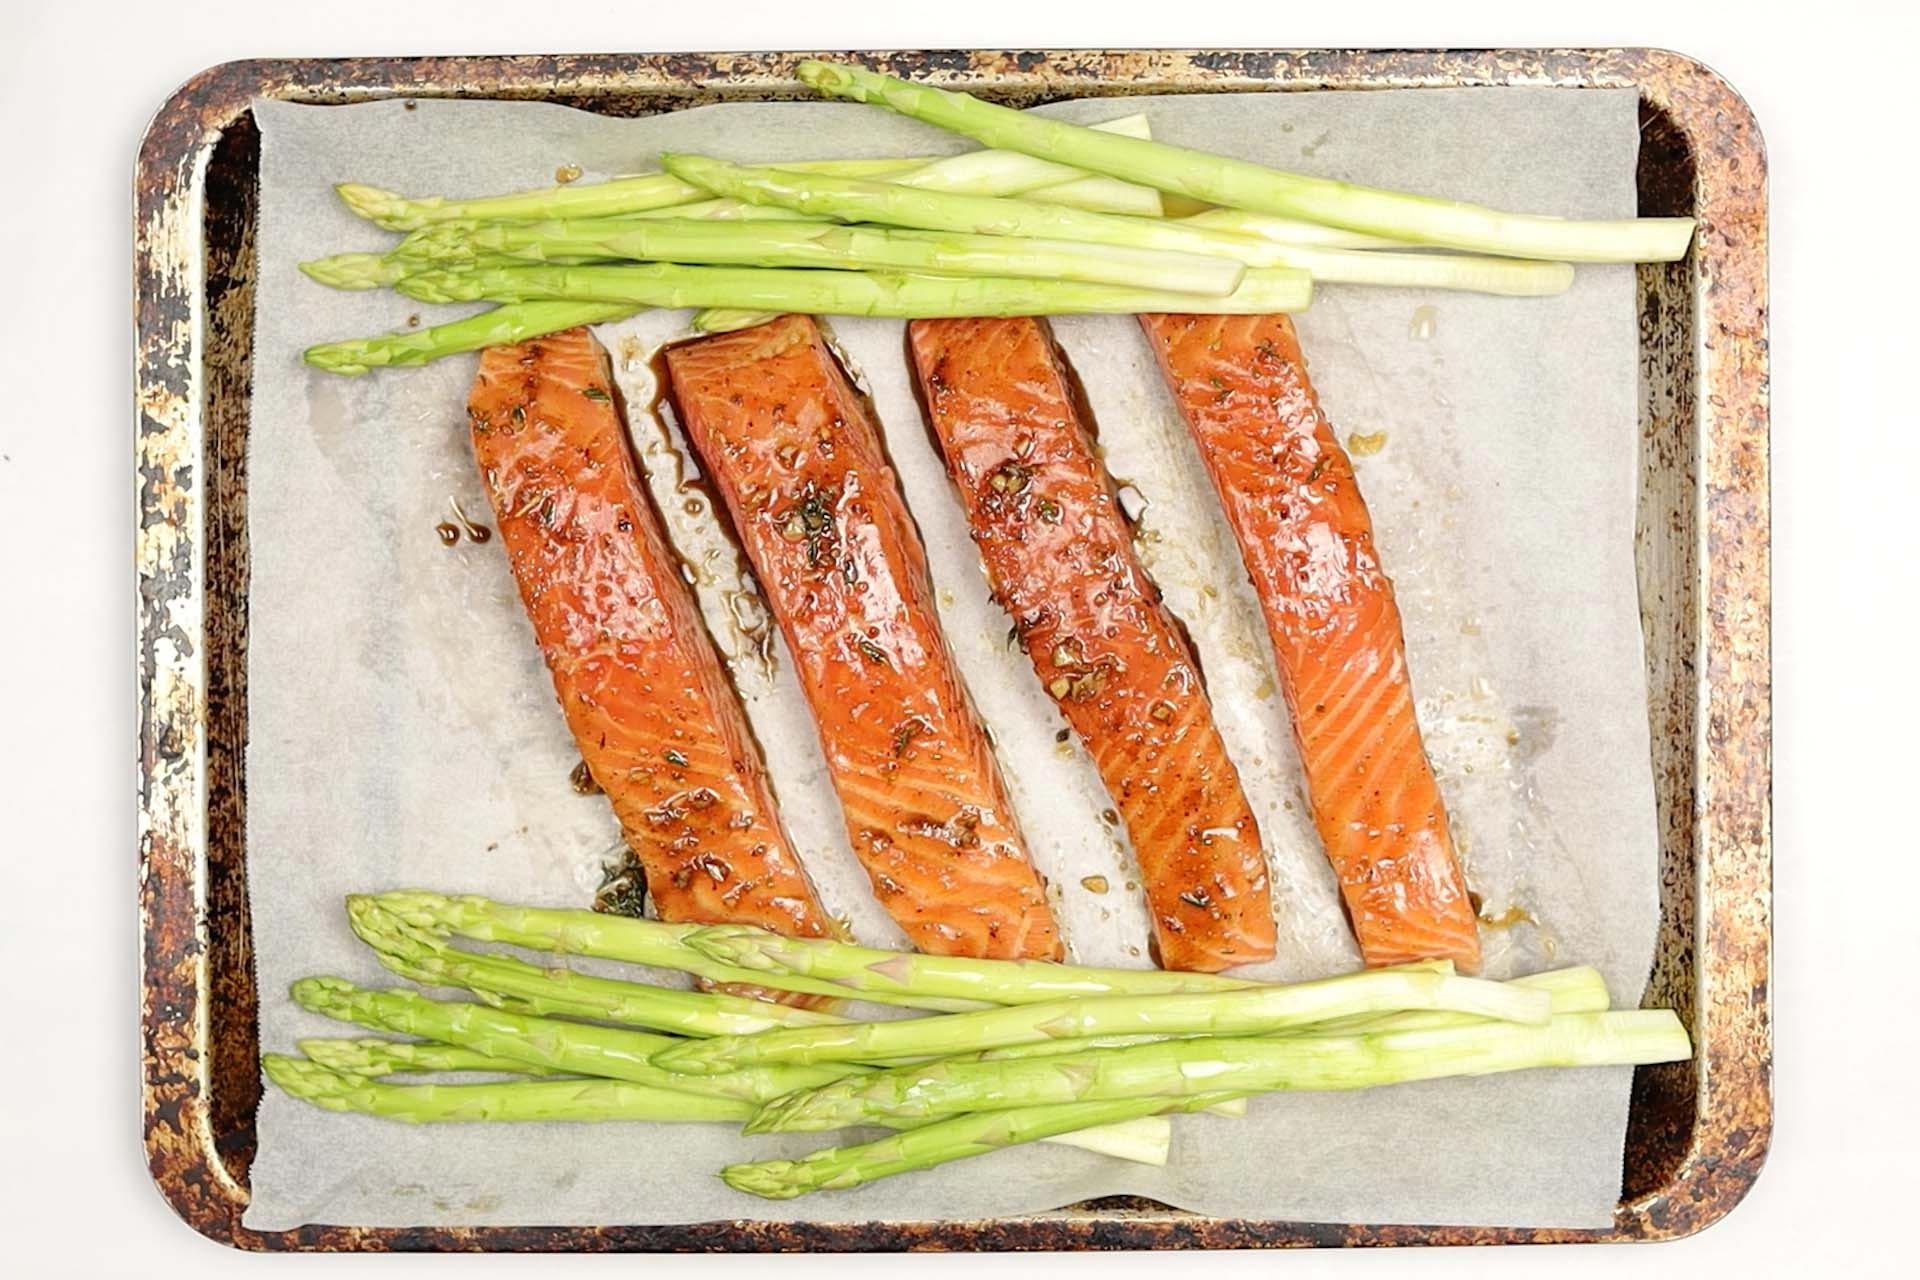 Easy Broiled Salmon Recipe step 4